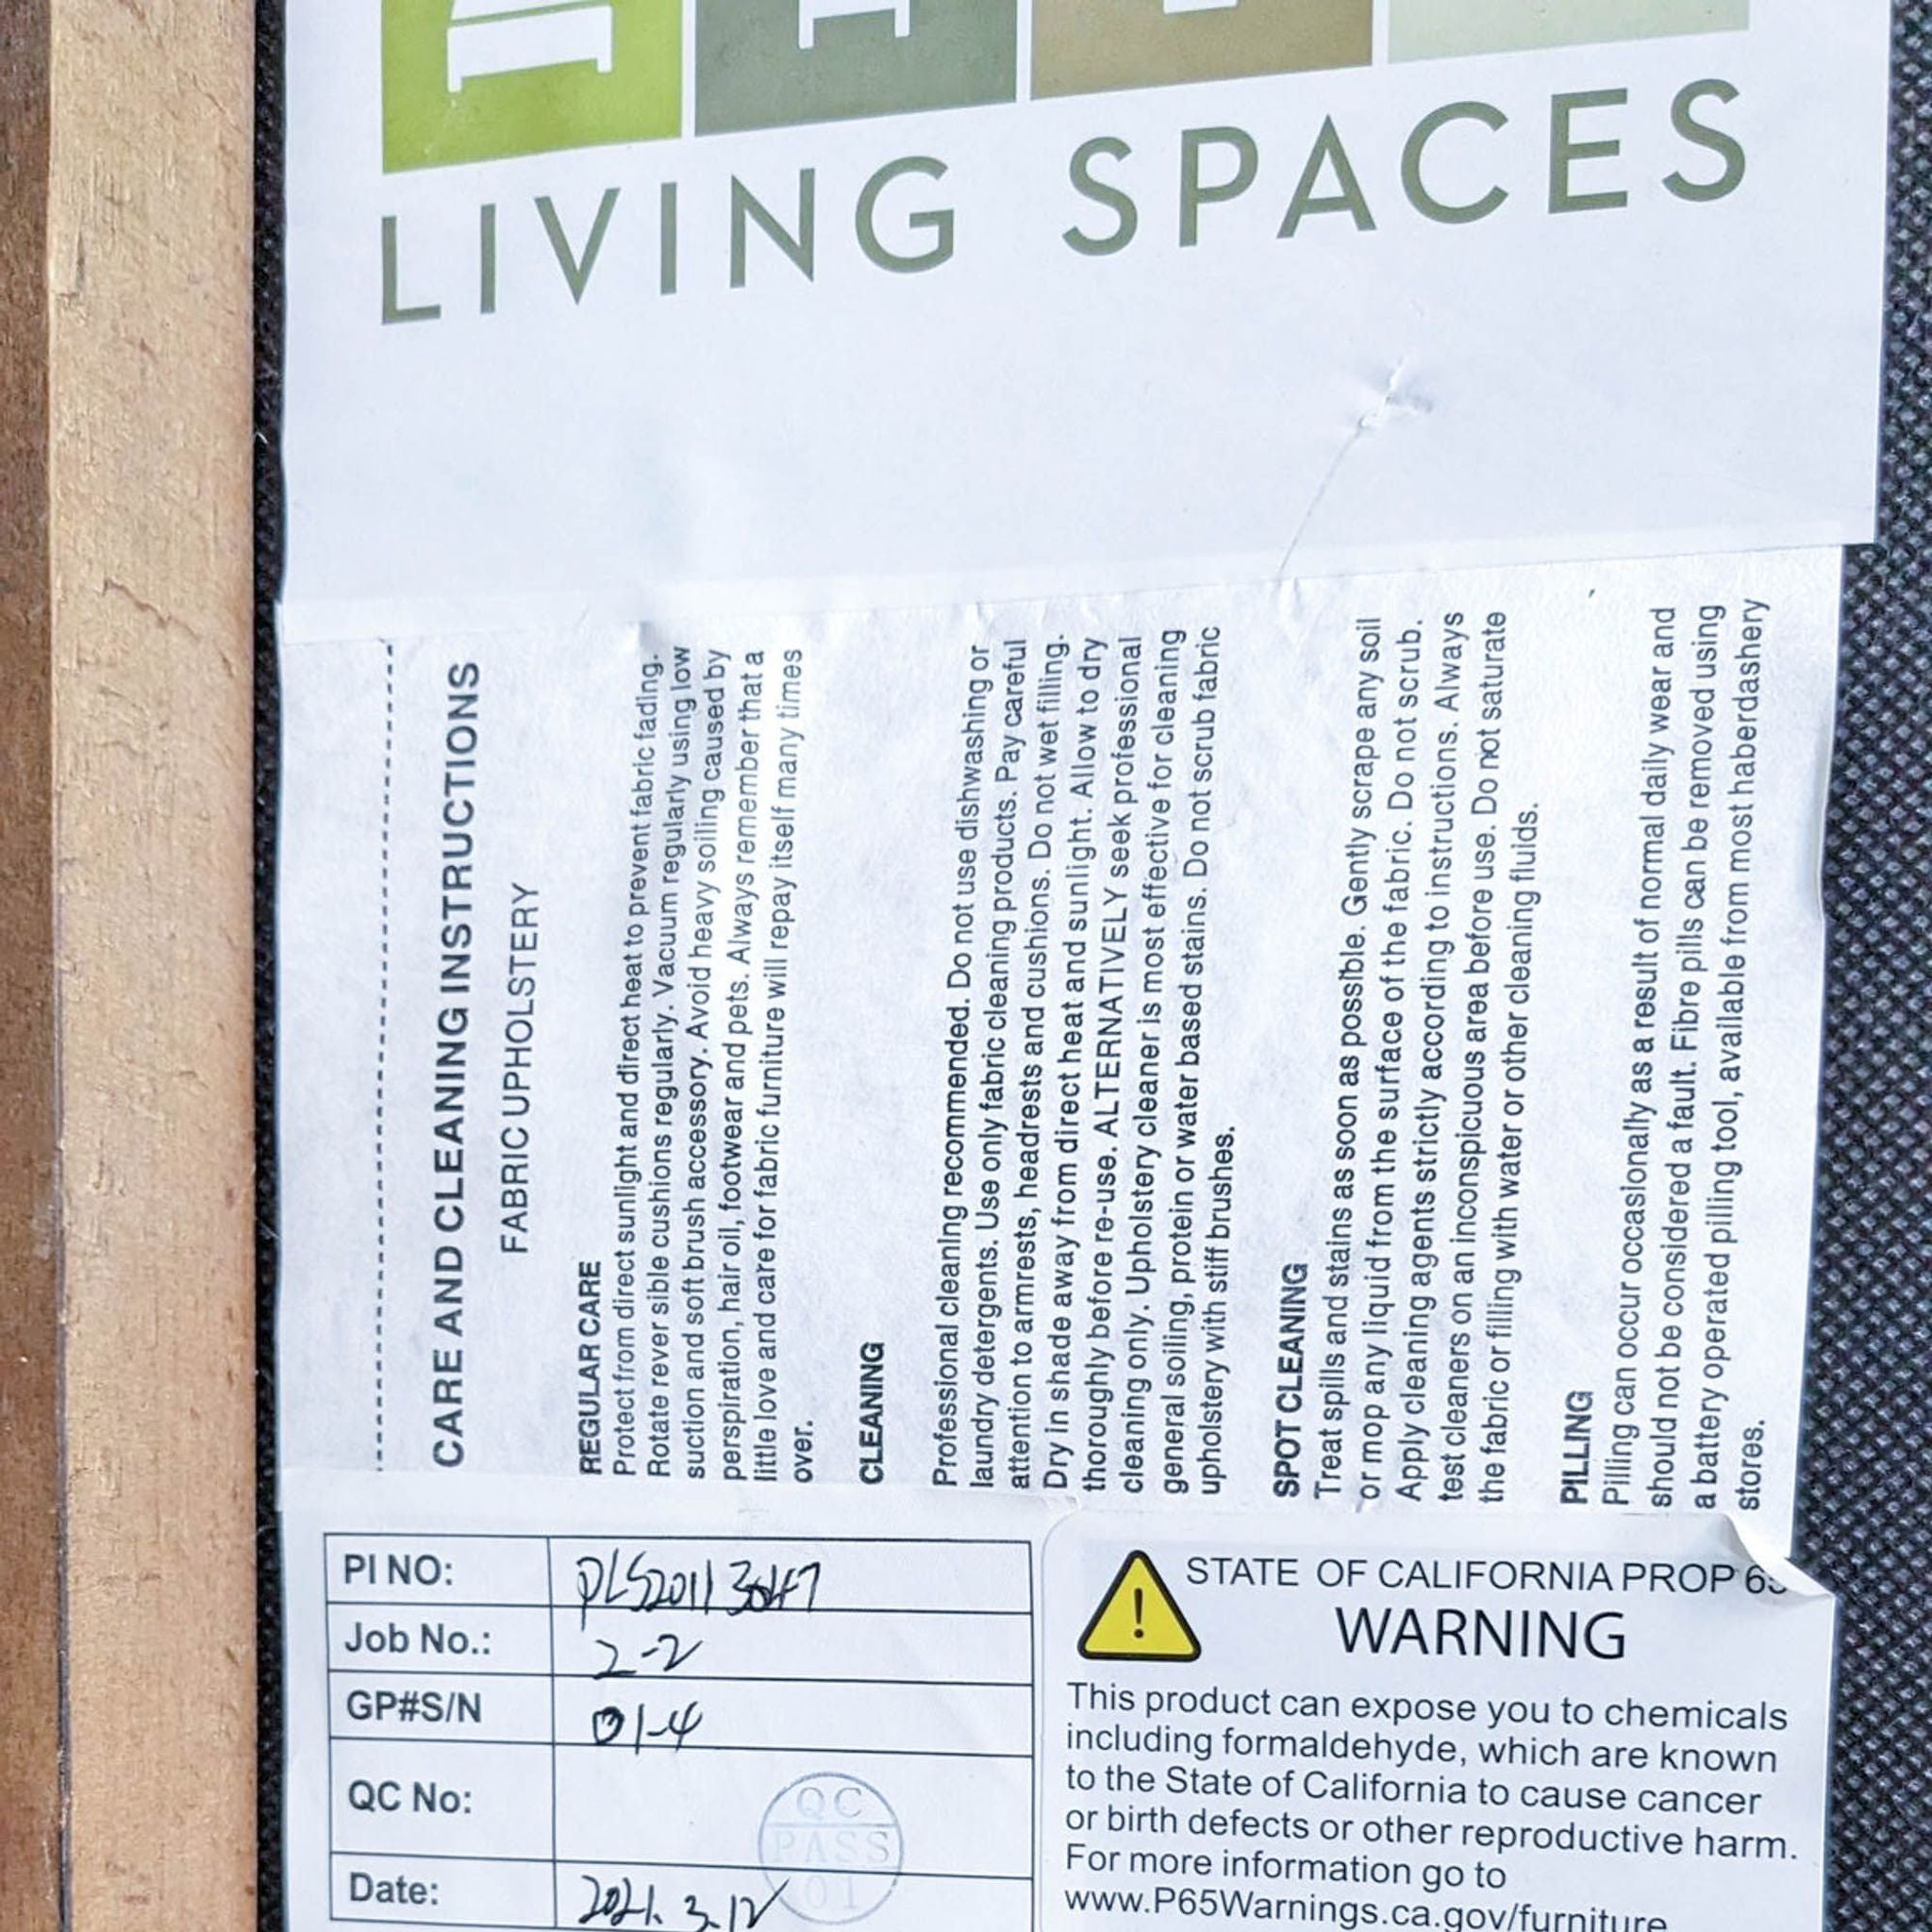 Please note that the third image appears to be a care and cleaning instructions label from Living Spaces, but due to the nature of the image, I cannot provide a detailed description of the text content within the image.